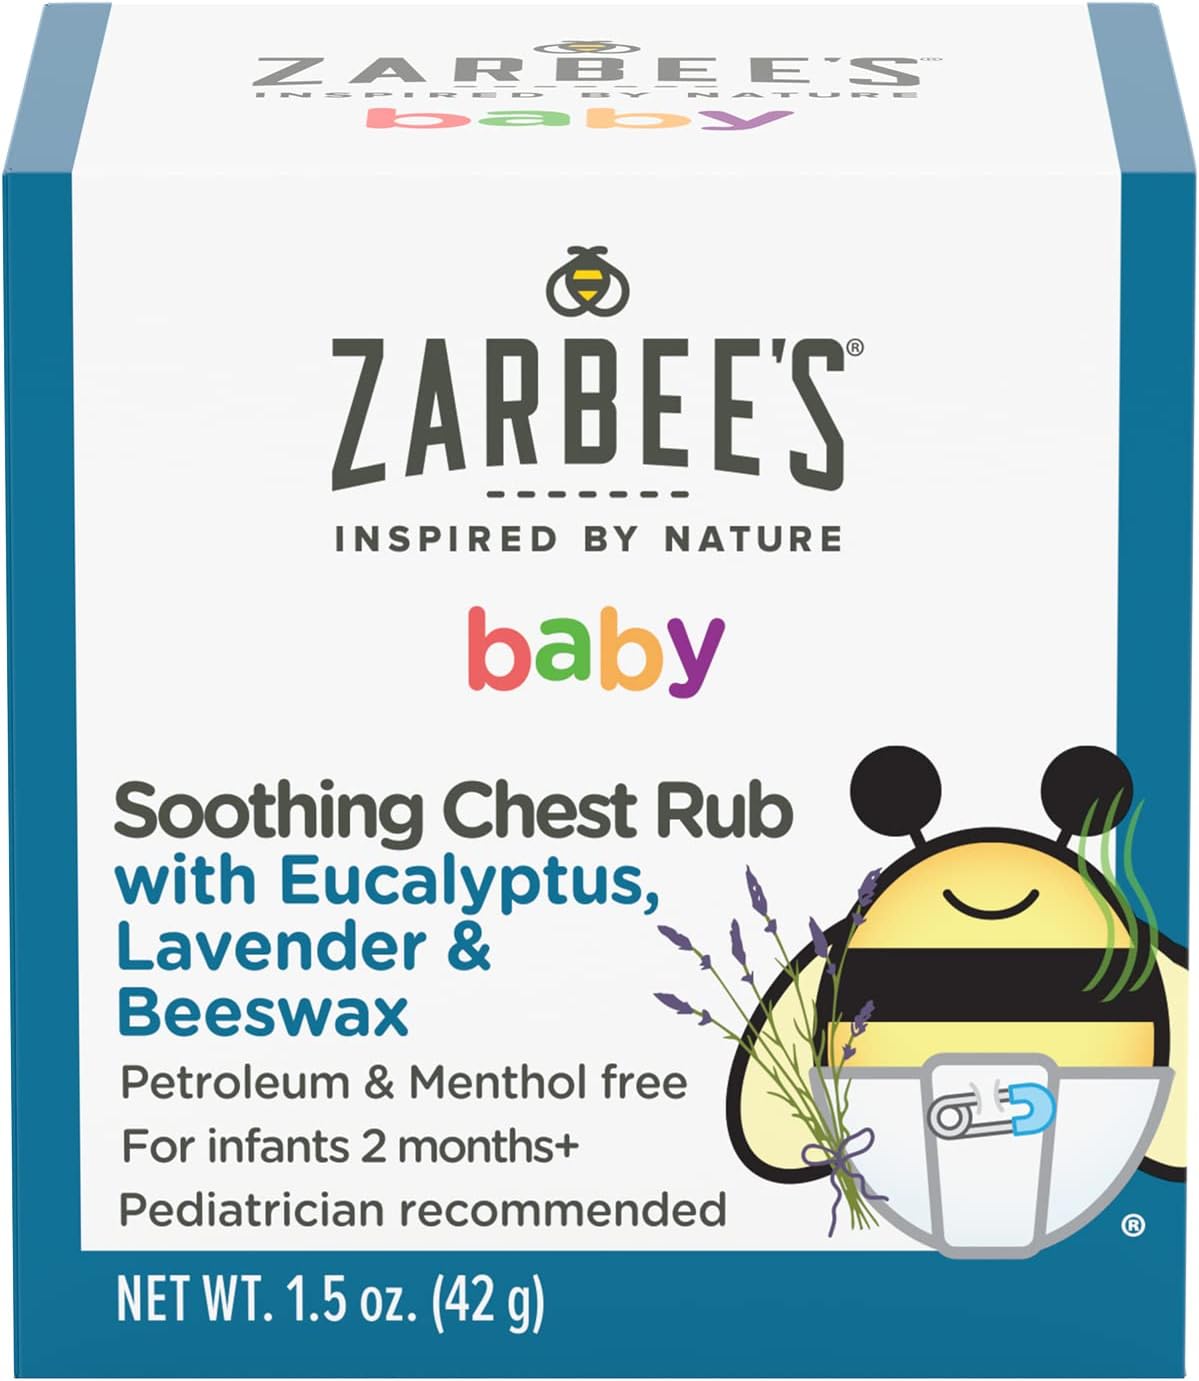 $4.08 w/ S&S: Zarbee's Baby Soothing Chest Rub with Eucalyptus & Lavender, 1.5 Ounce (2 for $6)